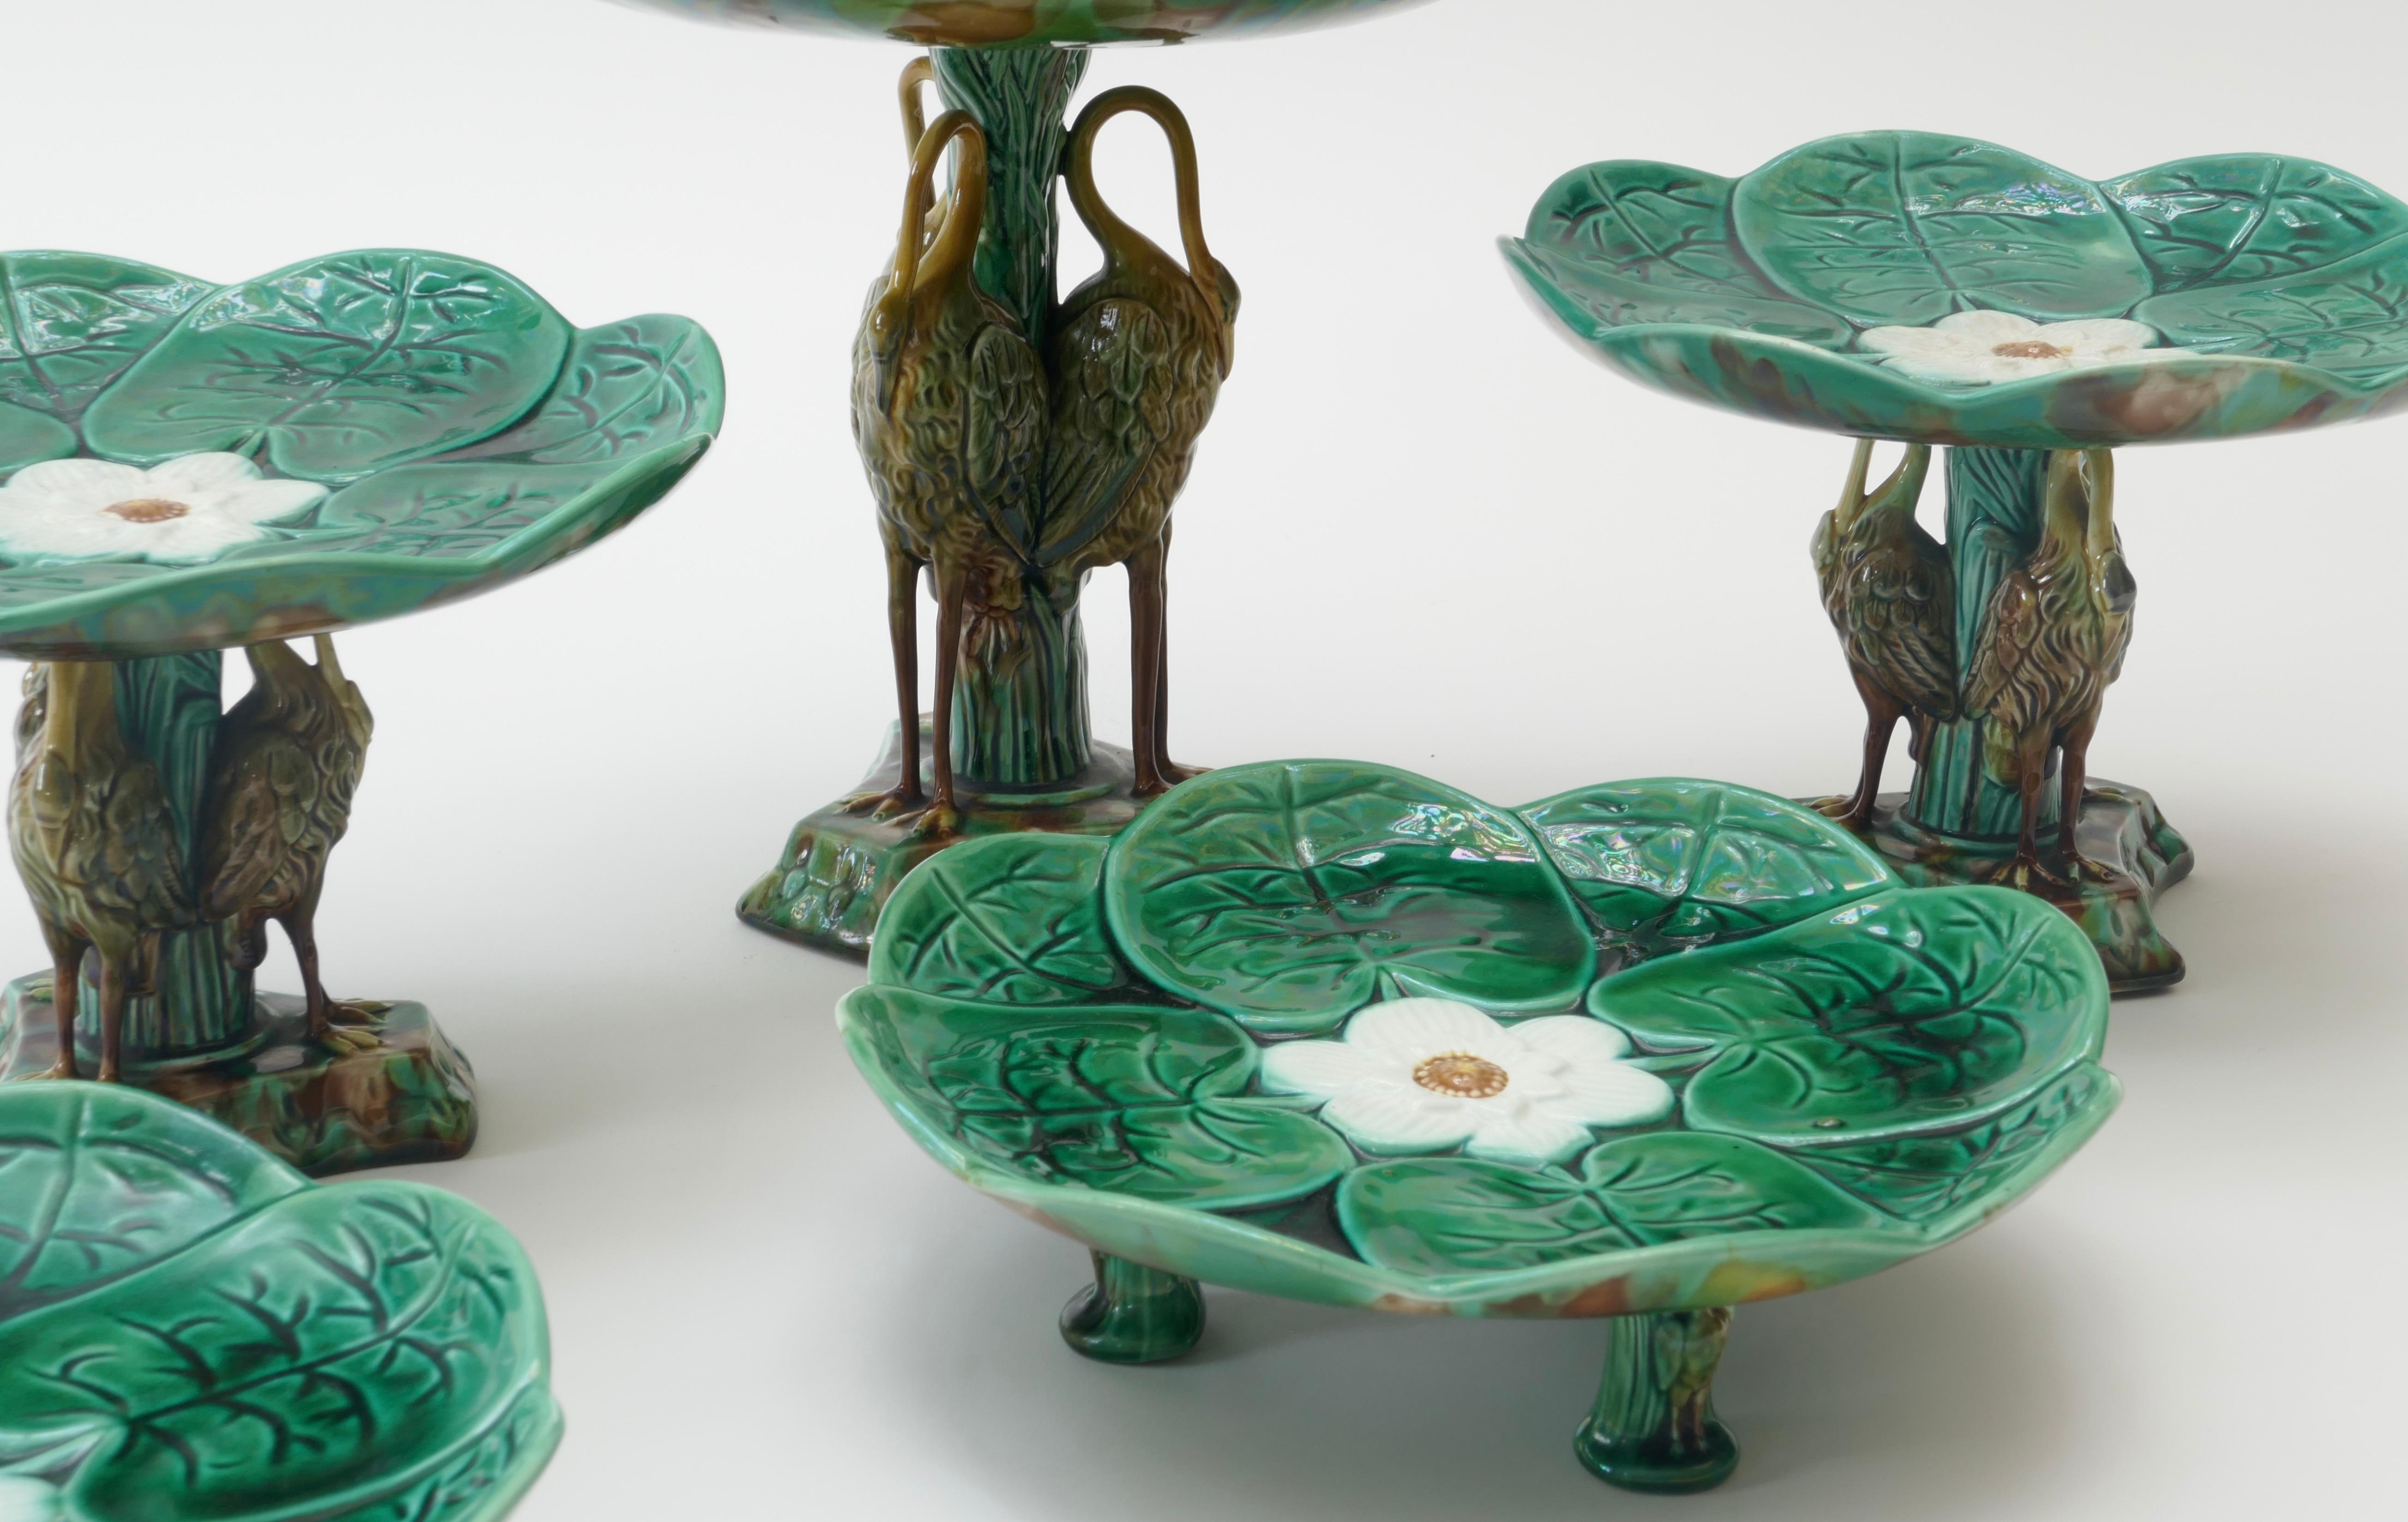 British Set of 5 Majolica Pond Lily and Stork Cake Stands